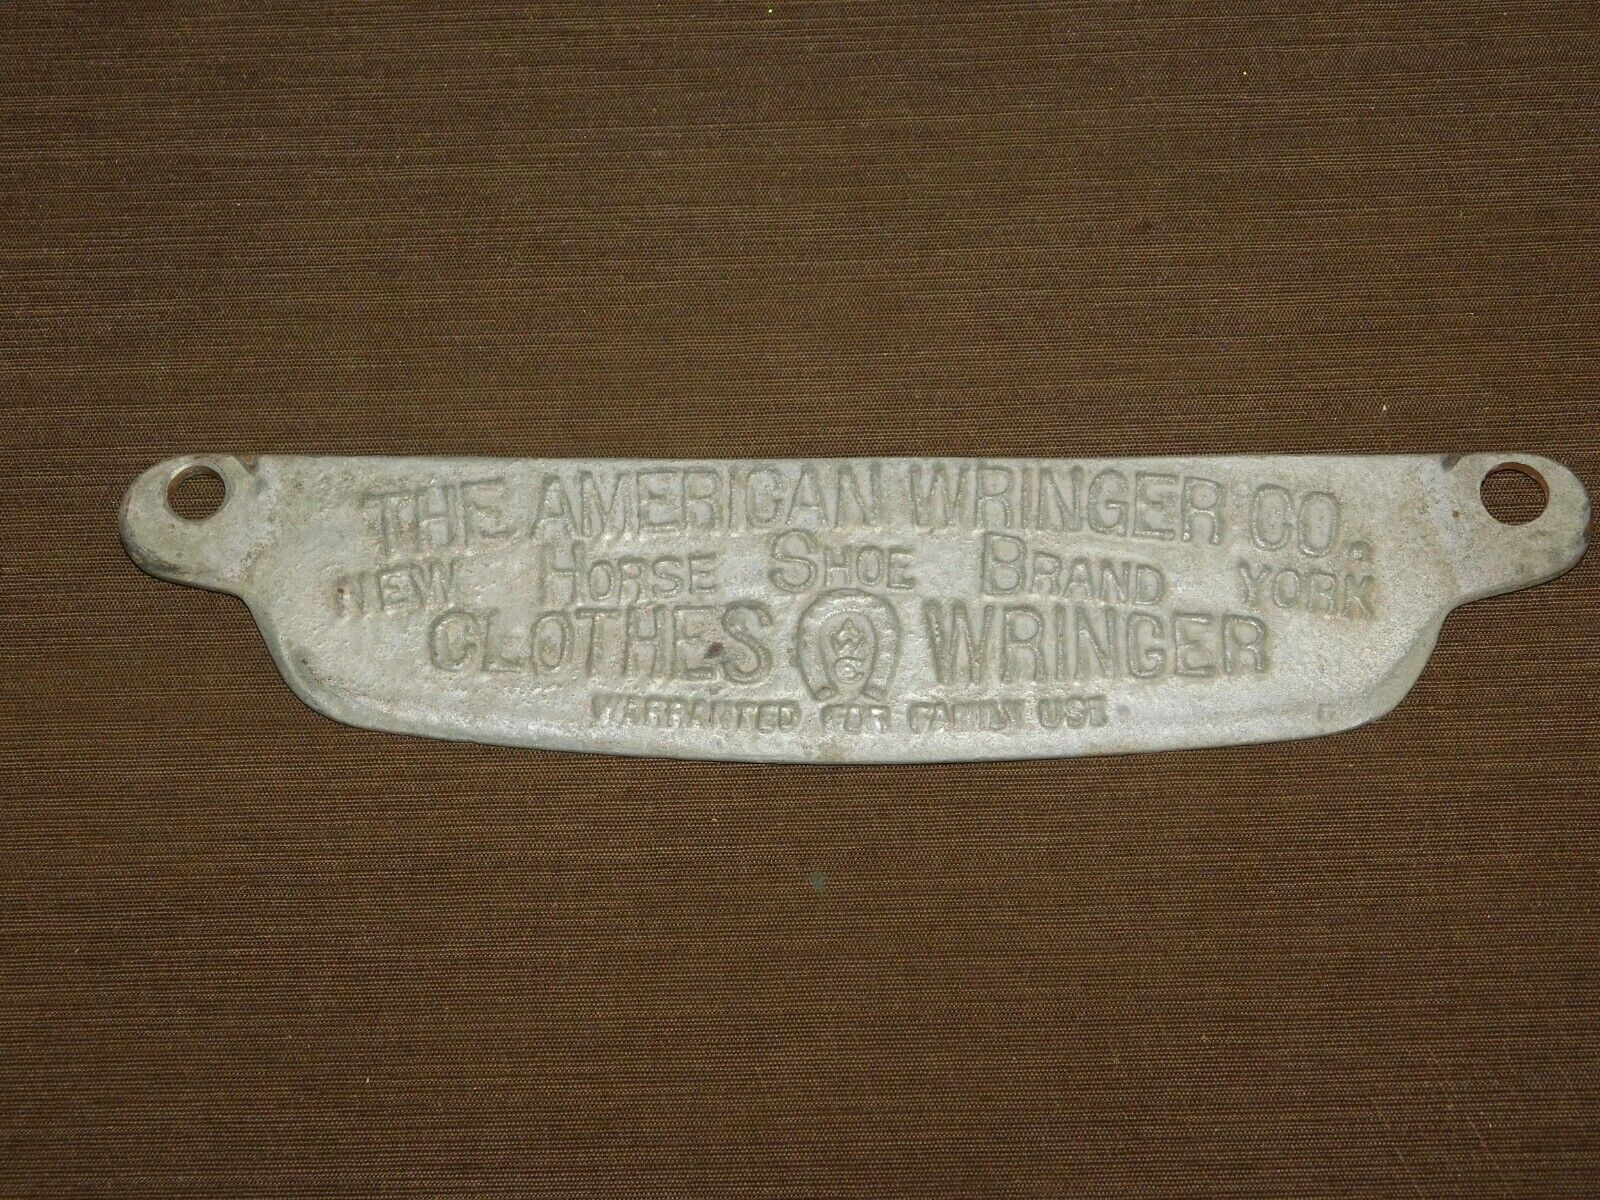 VINTAGE WASHING MACHINE THE AMERICAN WRINGER CO HORSE SHOE BRAND CLOTHES PLATE